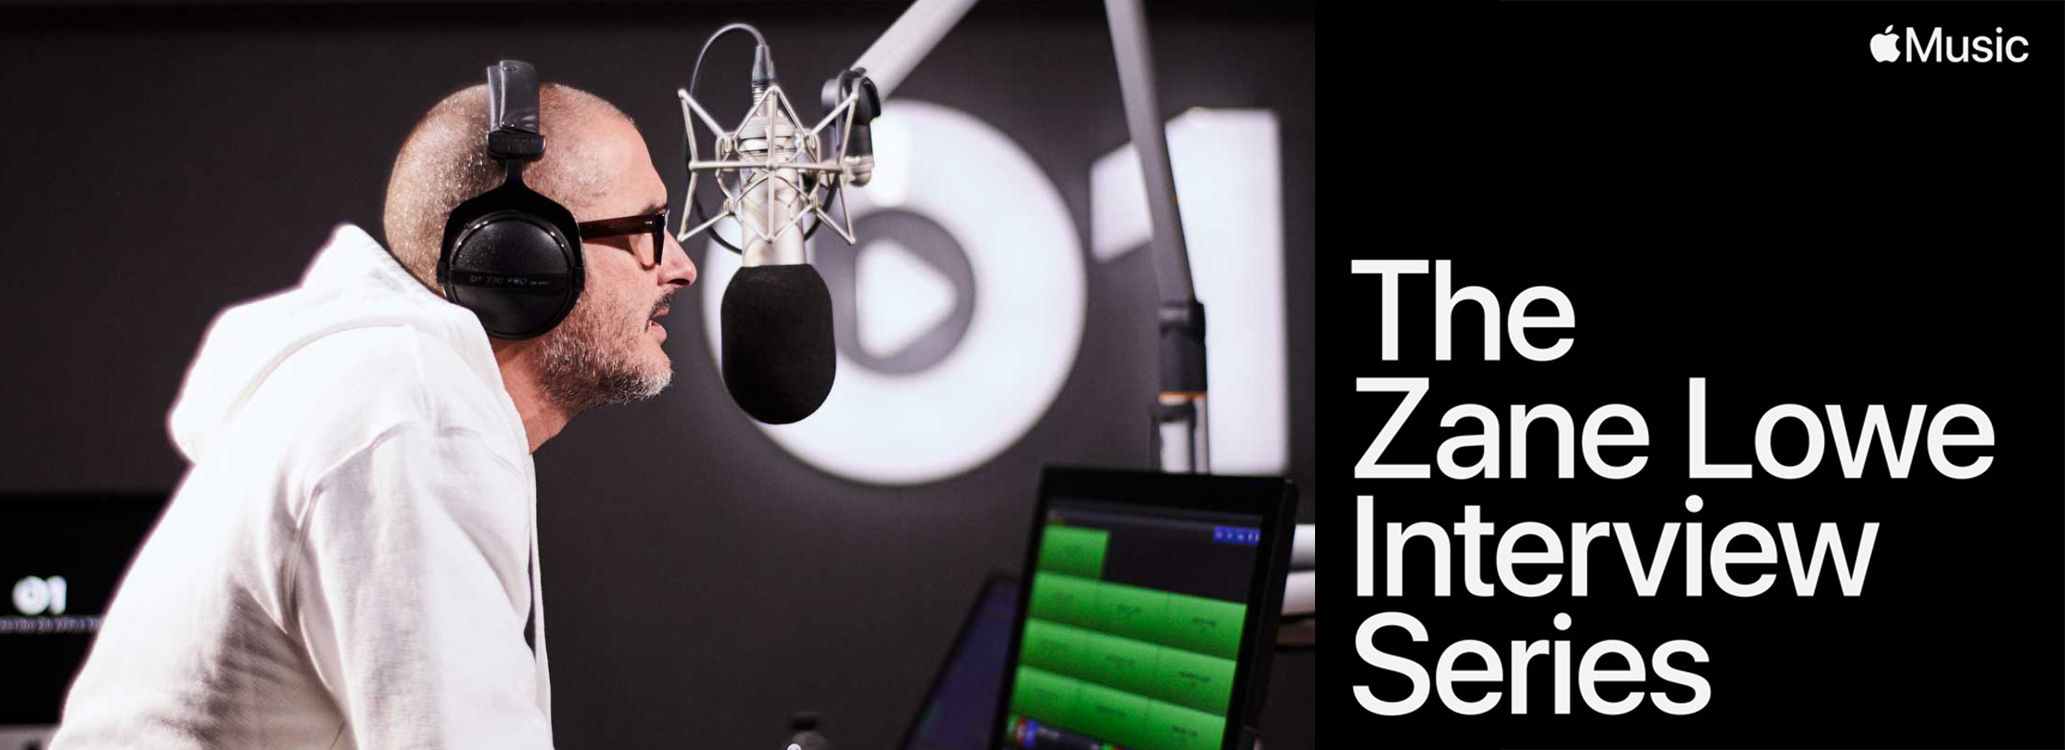 Apple Music launch ‘The Zane Lowe Interview Series’ podcast